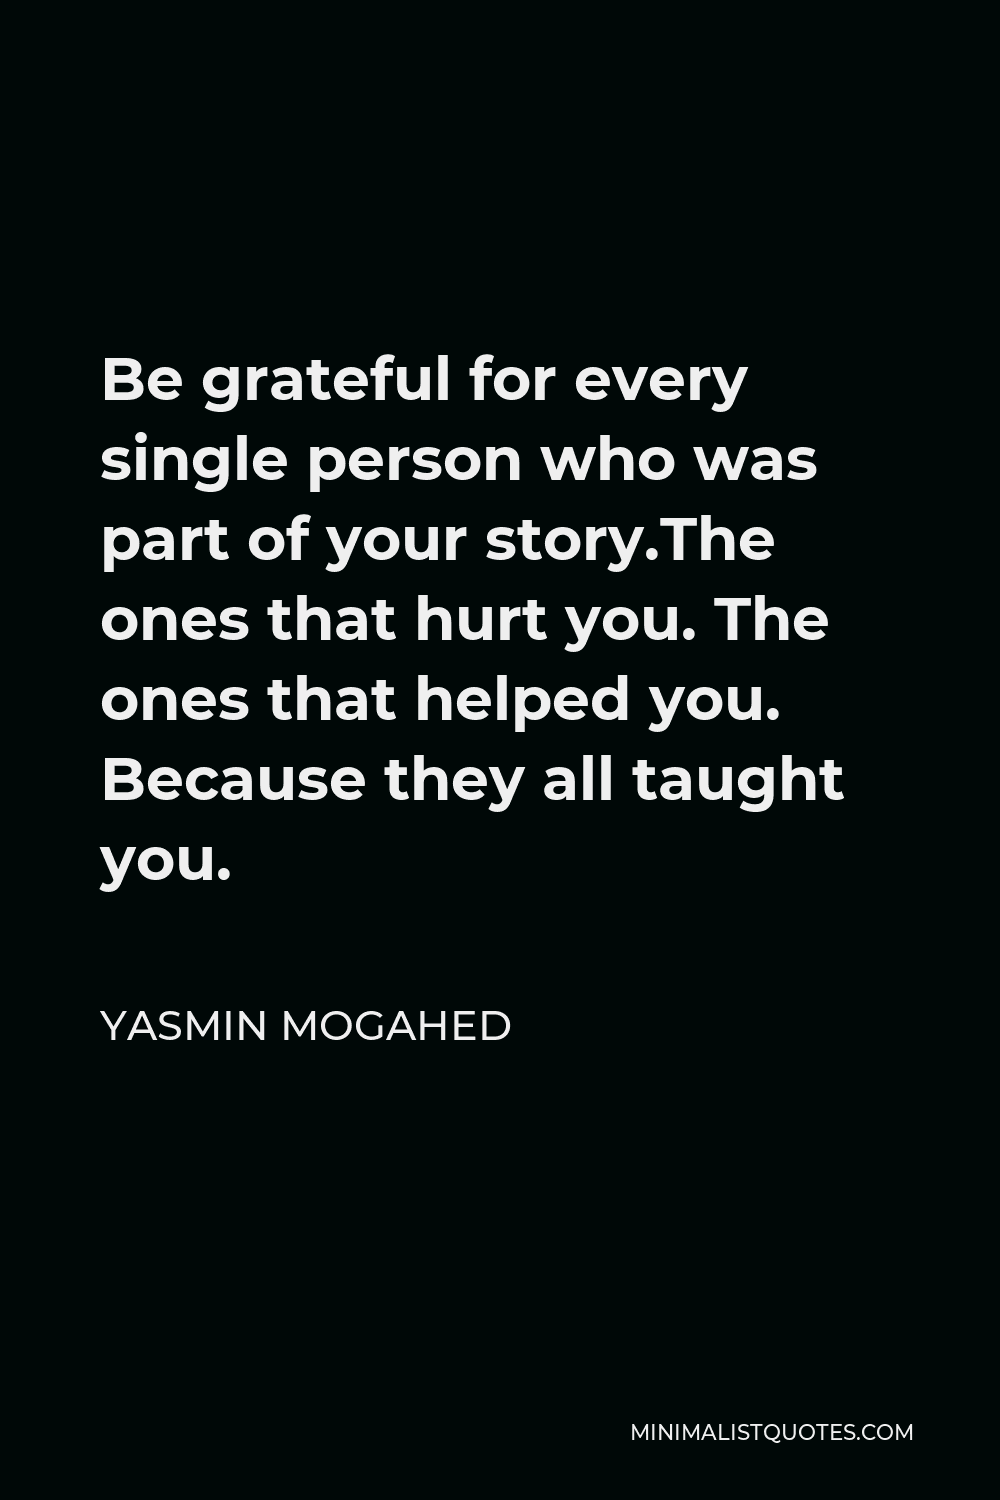 Yasmin Mogahed Quote - Be grateful for every single person who was part of your story.The ones that hurt you. The ones that helped you. Because they all taught you.